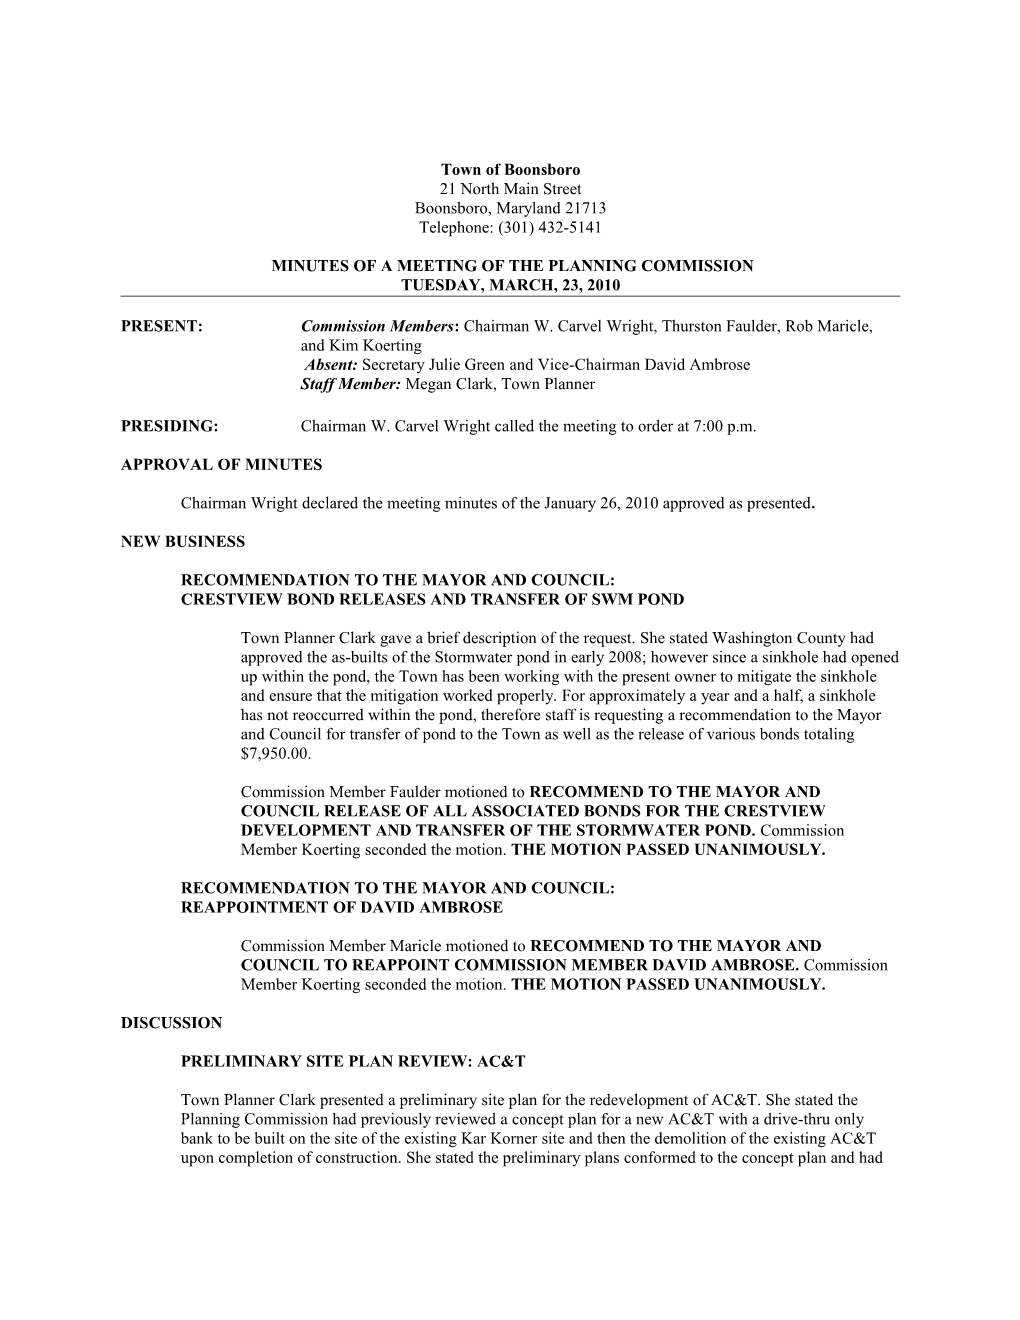 Boonsboro Planning Commission Minutes s2